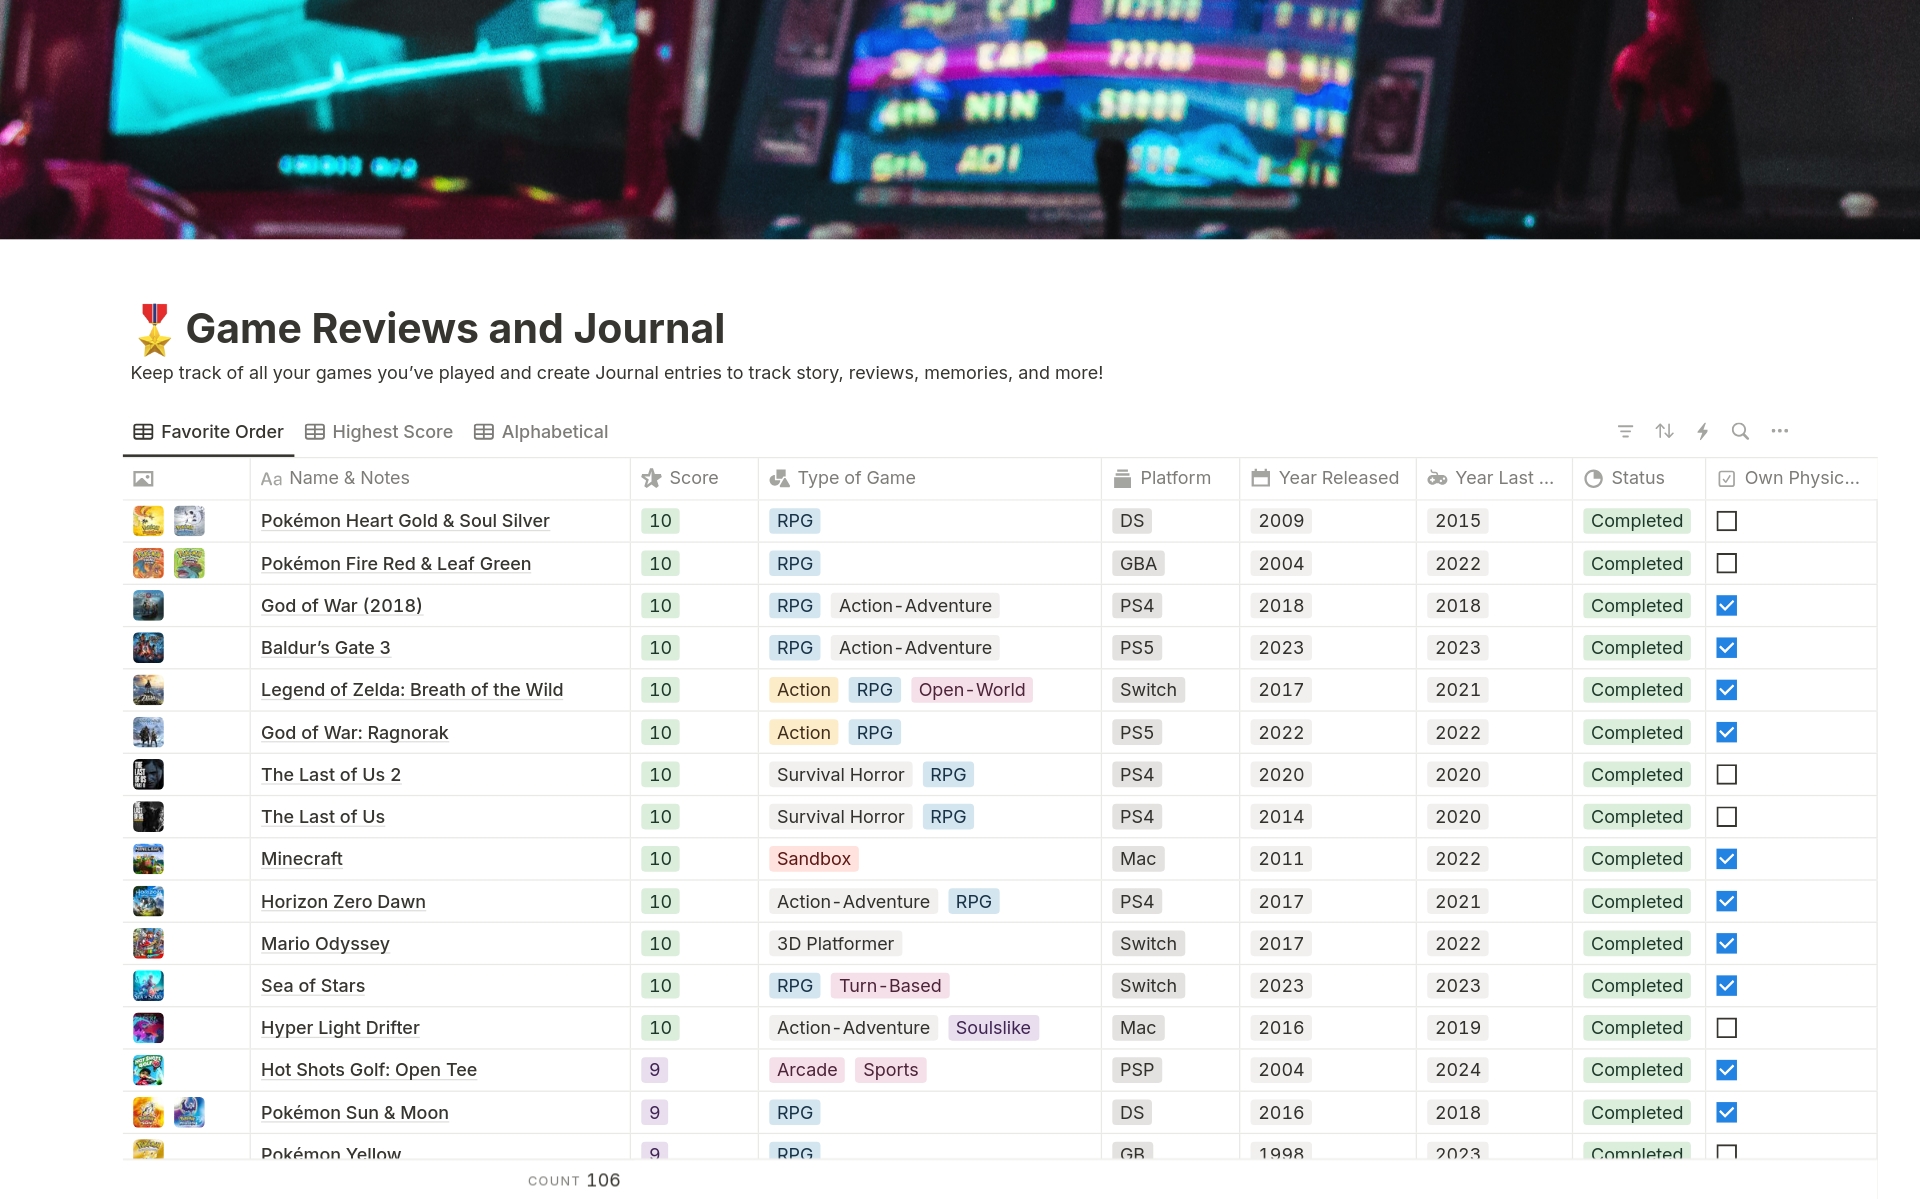 Level up your gaming experience with the ultimate customizable video game journal and tracker for Notion!
Tired of juggling spreadsheets and scattered notes? This template is your one-stop shop for mastering your gaming journey.